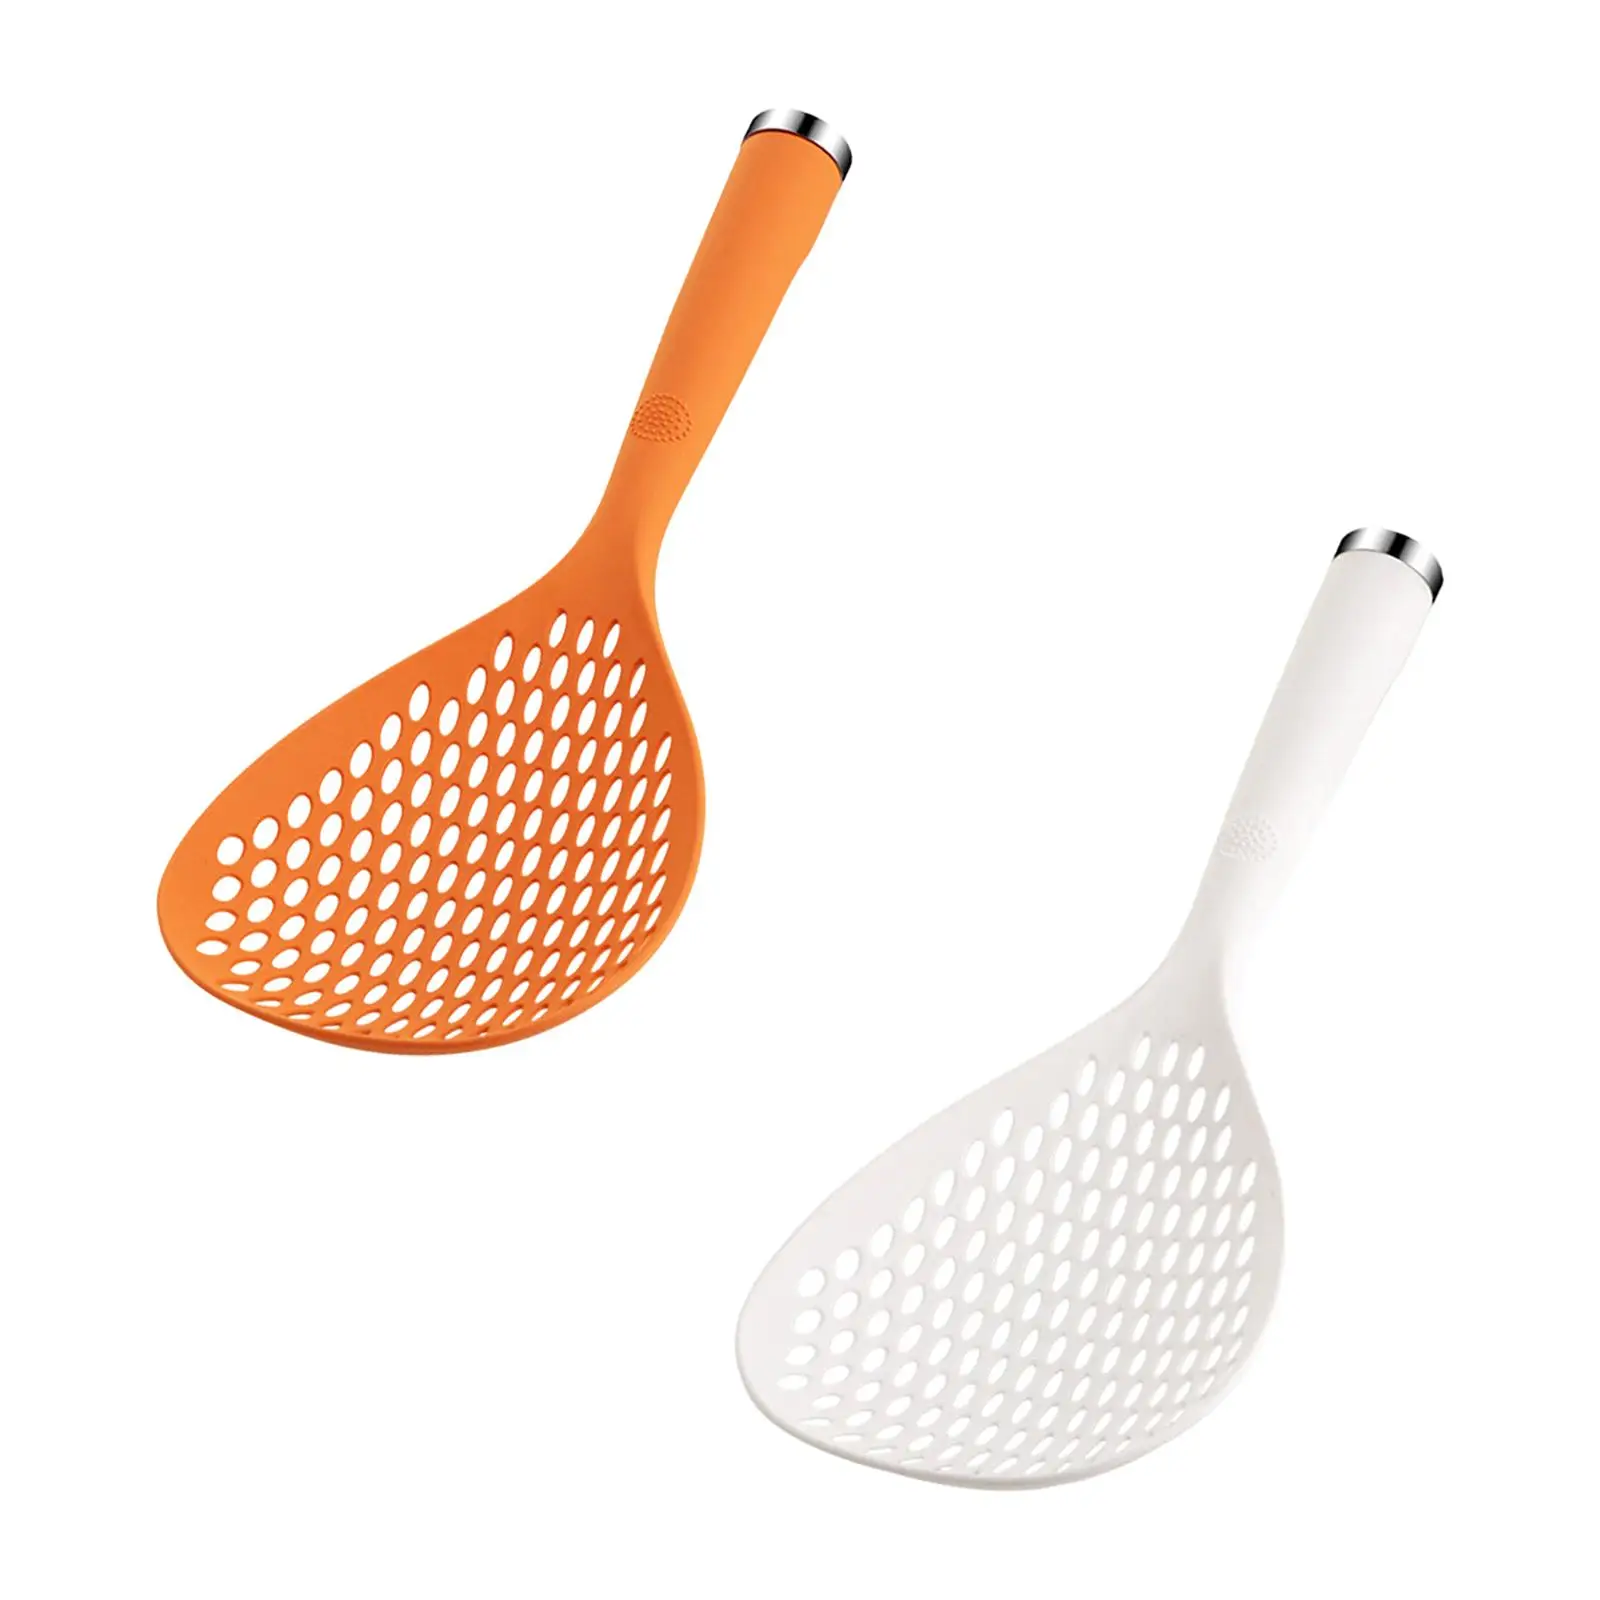 Strainer Mesh Basket Kitchen Tool Anti Scalding Spoon Kitchen Skimmer with Handle for Cooking Vegetable Noodles Kitchen Fruits